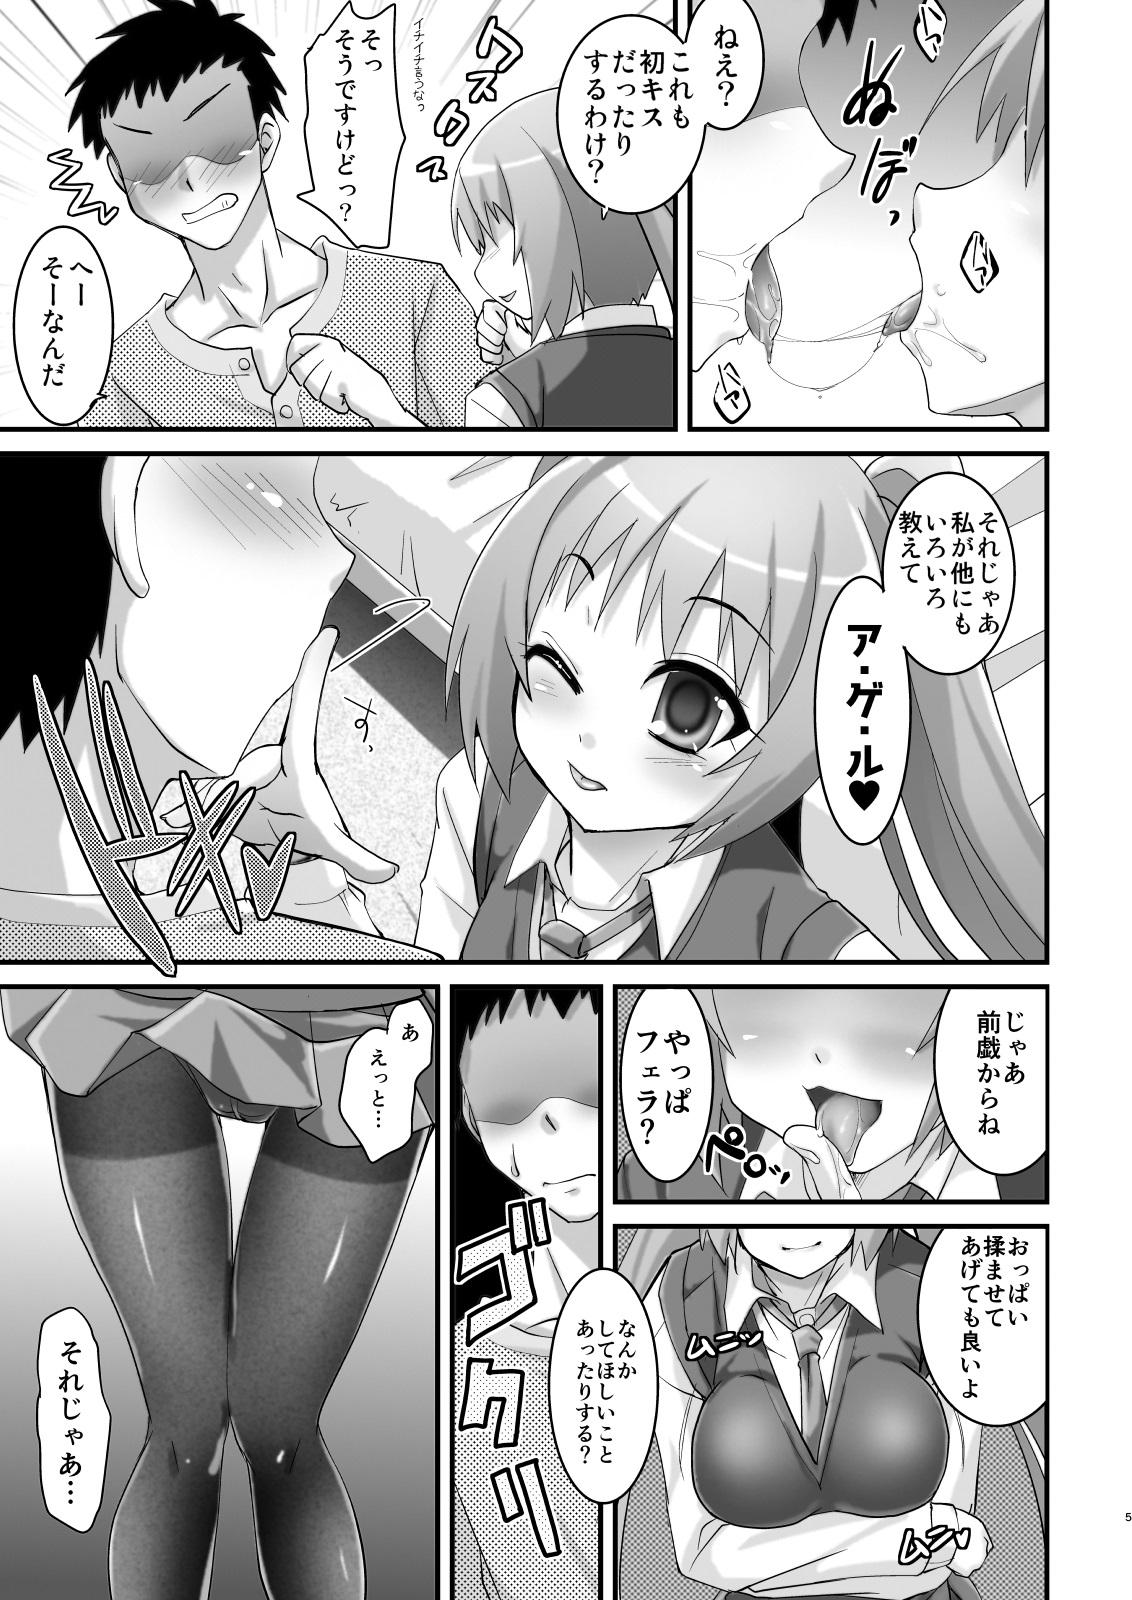 Kink Tsundere Tights to Twintails - Original Alternative - Page 5